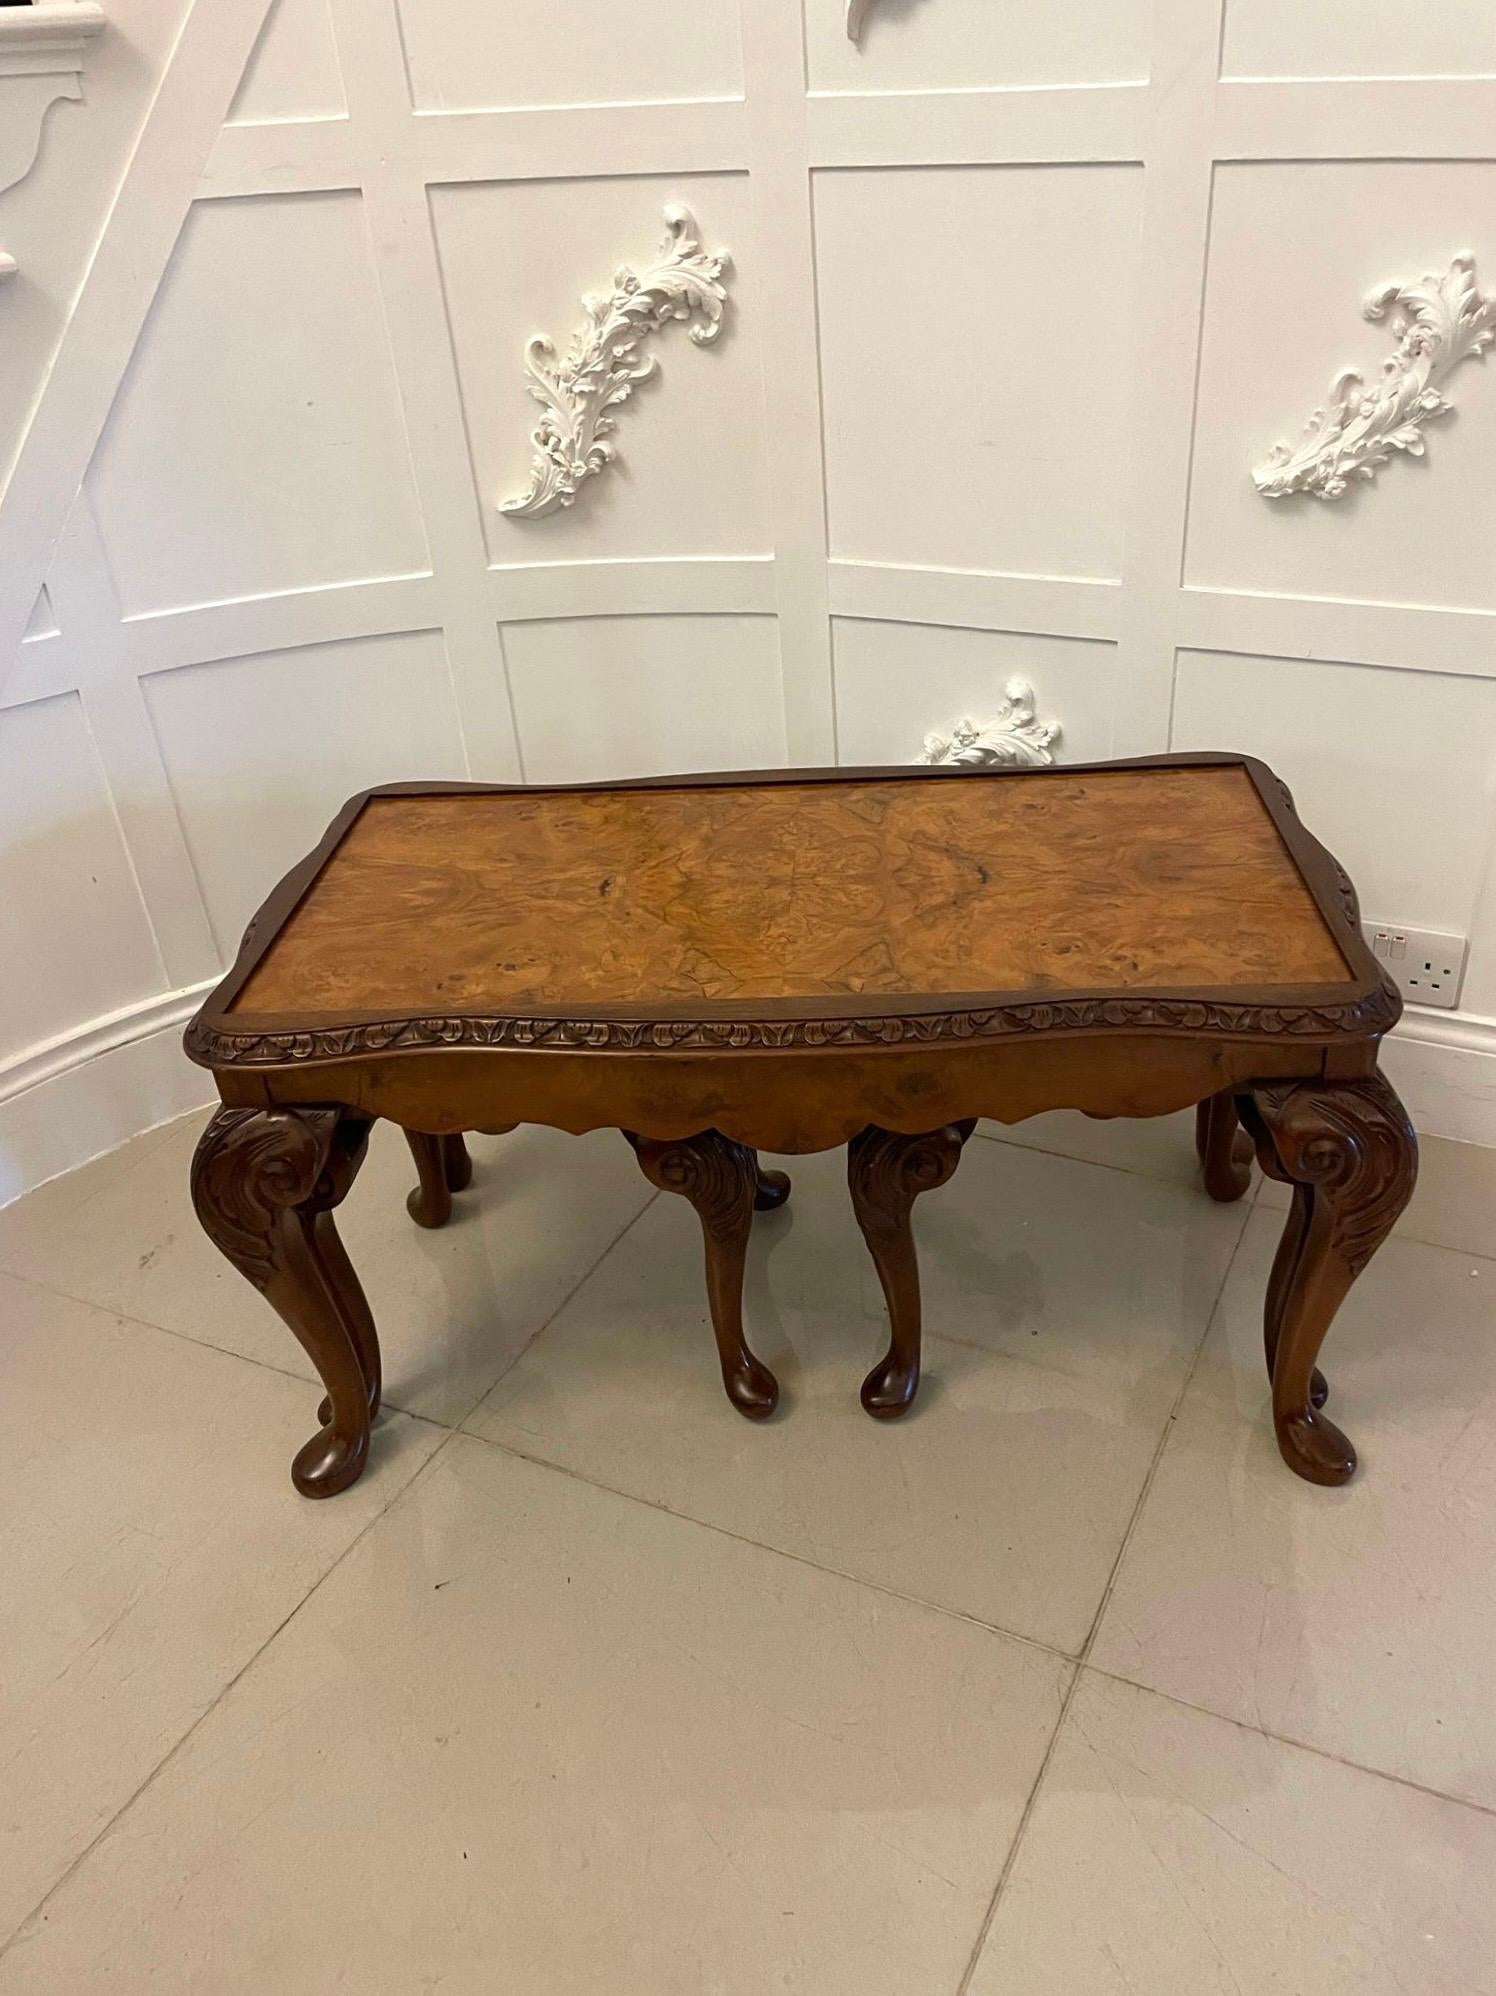 Unusual Antique nest of 3 quality burr walnut tables having a quality burr walnut rectangular shaped top with a carved serpentine shaped edge above two smaller pull out freestanding tables with quality burr walnut tops and a carved edge serpentine